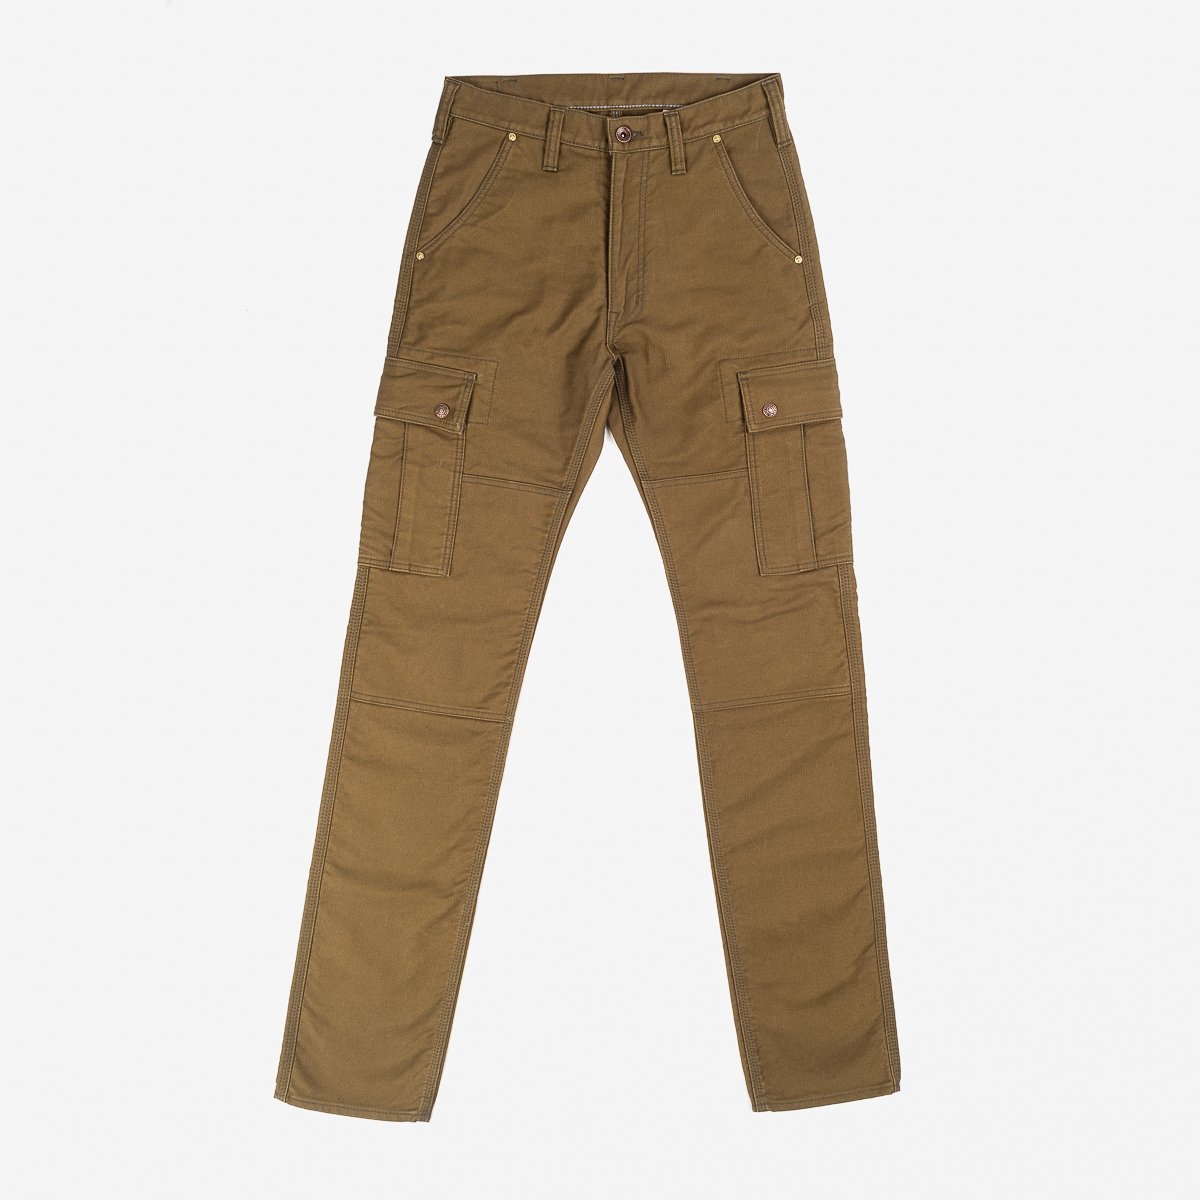 IHDR-502-OLV 11oz Cotton Whipcord Cargo Pants - Olive - 1